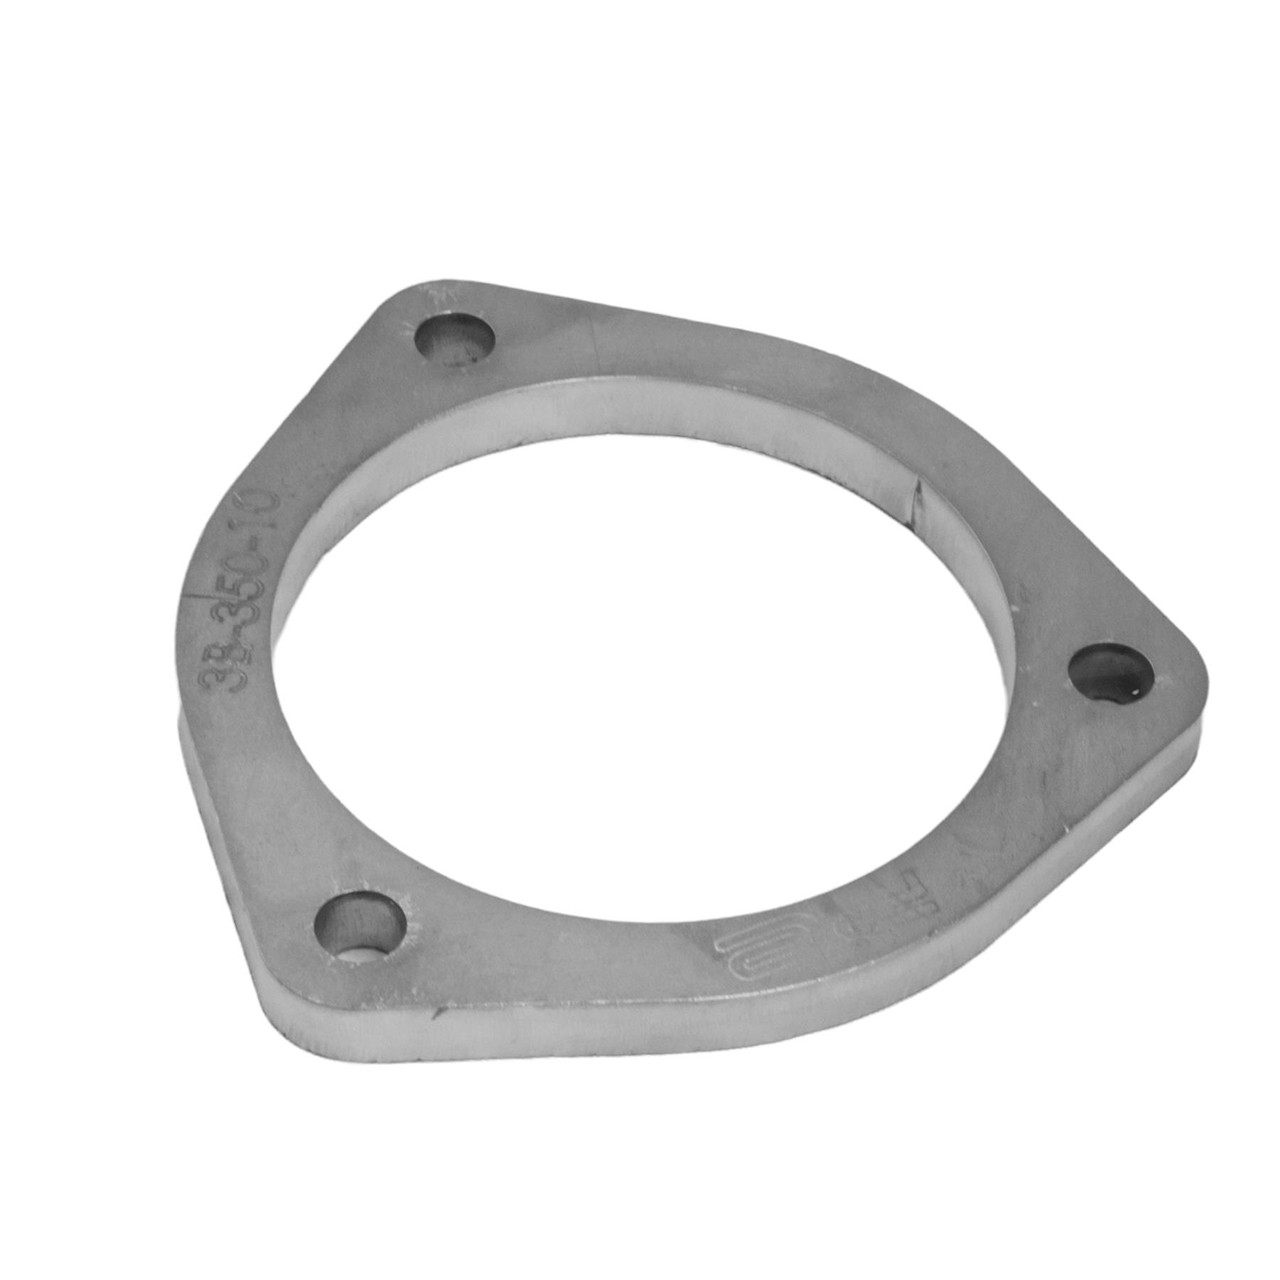 STAINLESS STEEL 3 BOLT FLANGE 8MM THICK SIZES 1.5" TO 3.5" EXHAUST JOINER 